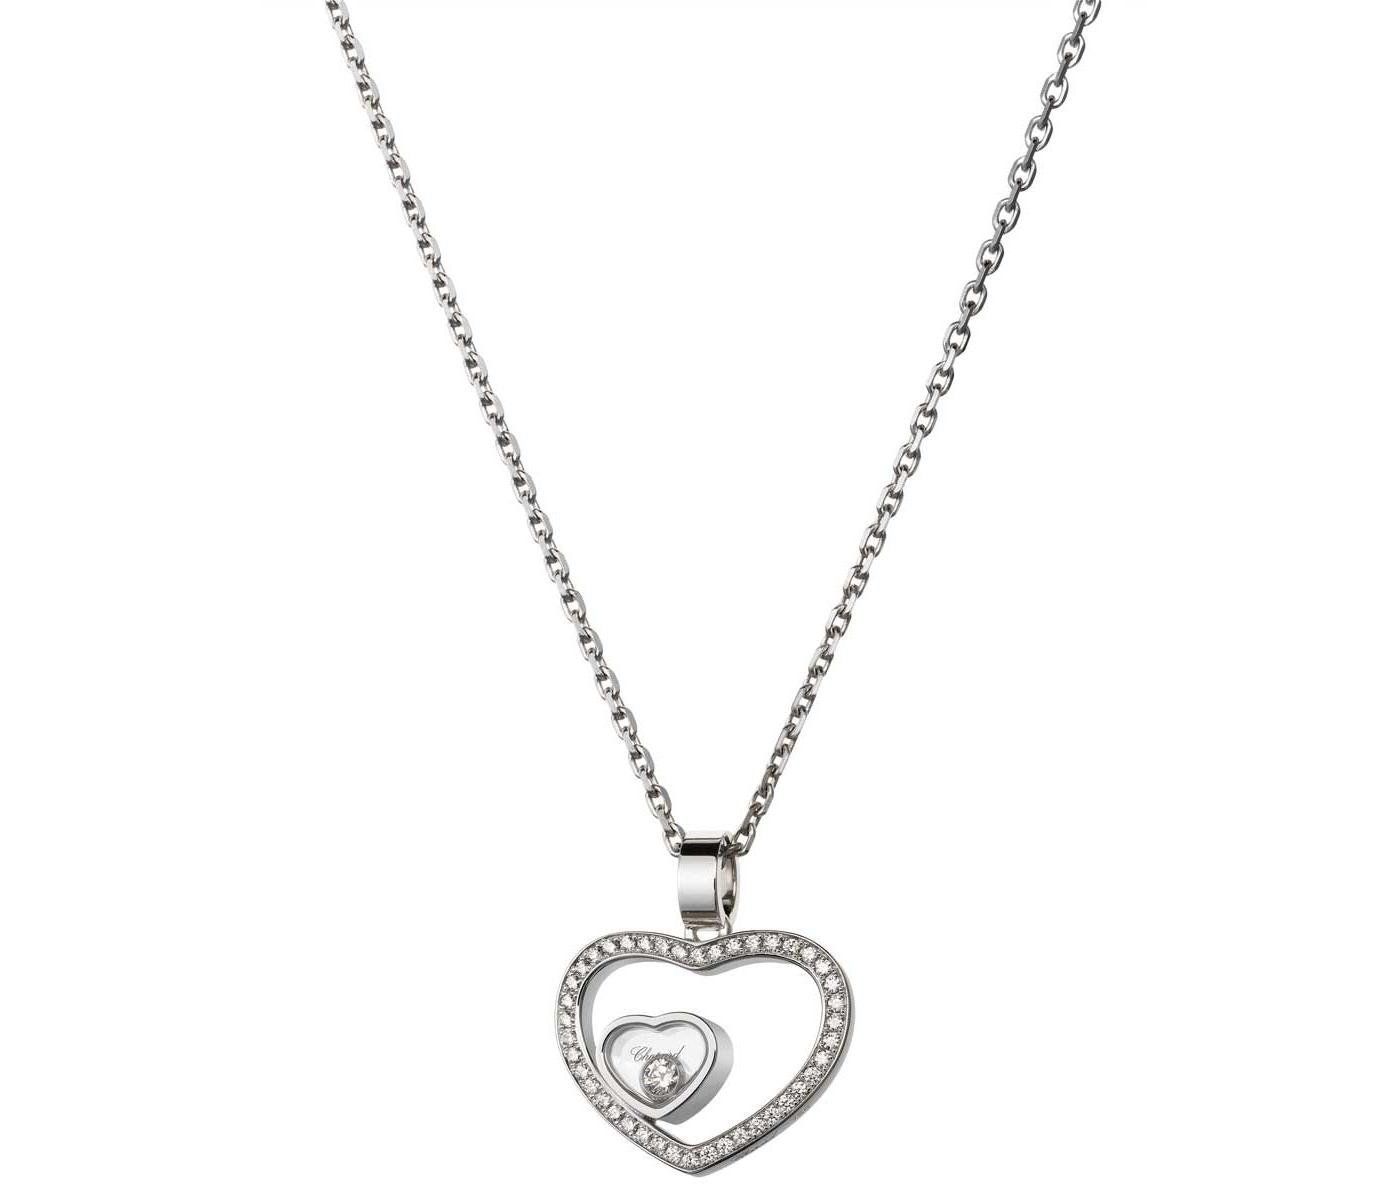 Pendant by Chopard